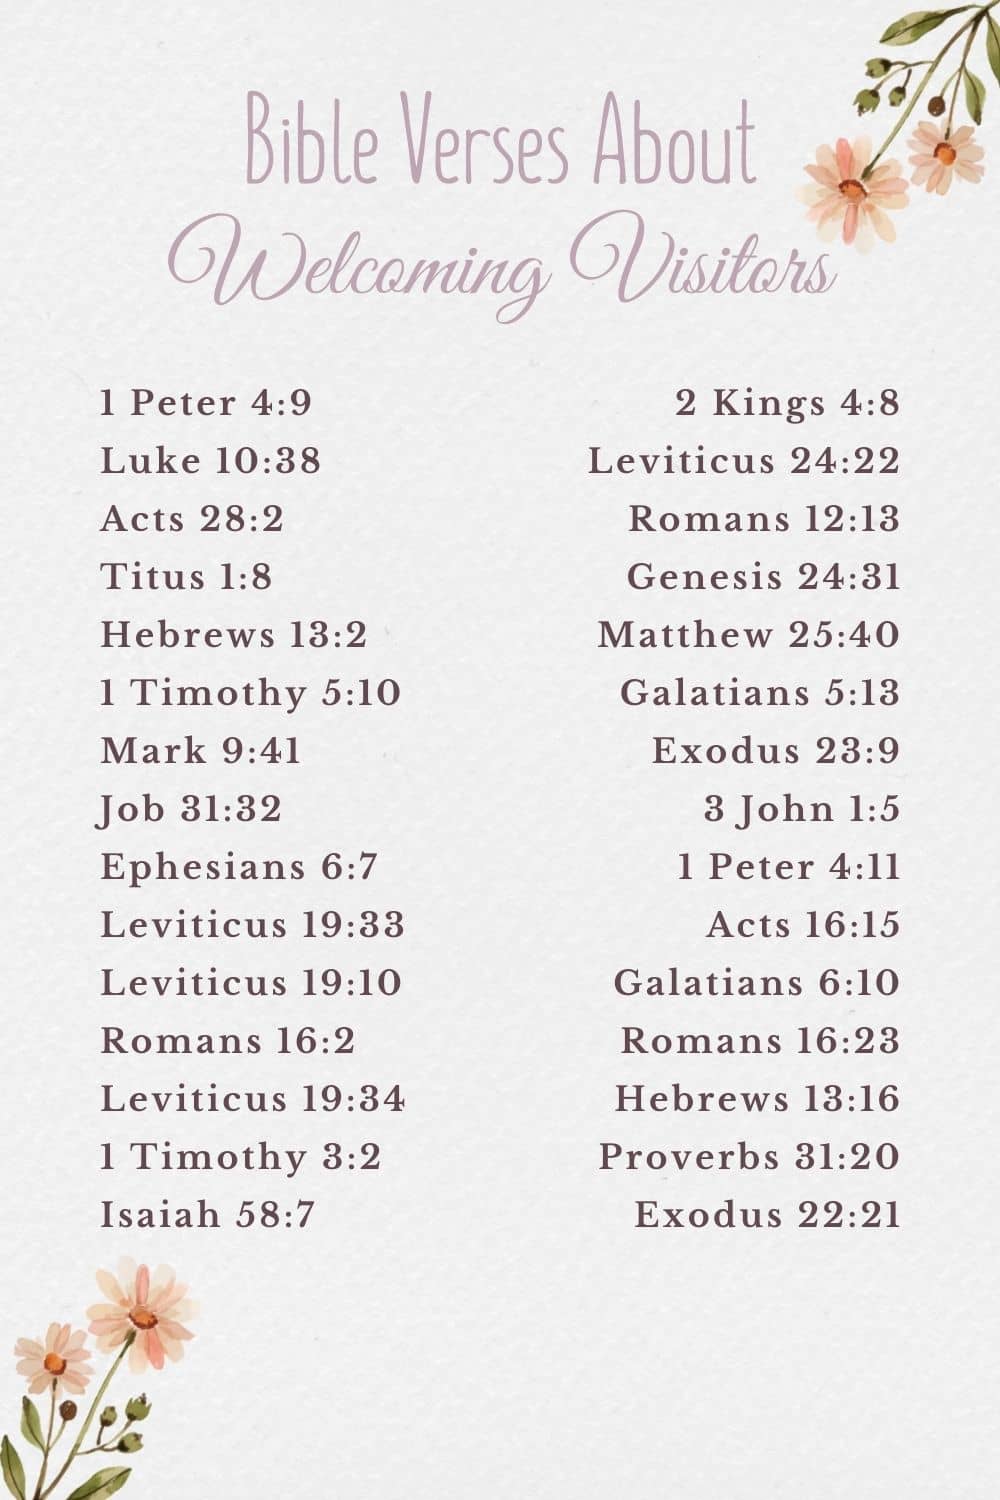 bible verses about welcoming visitors
bible verses about hospitality
what does the bible say about hospitality